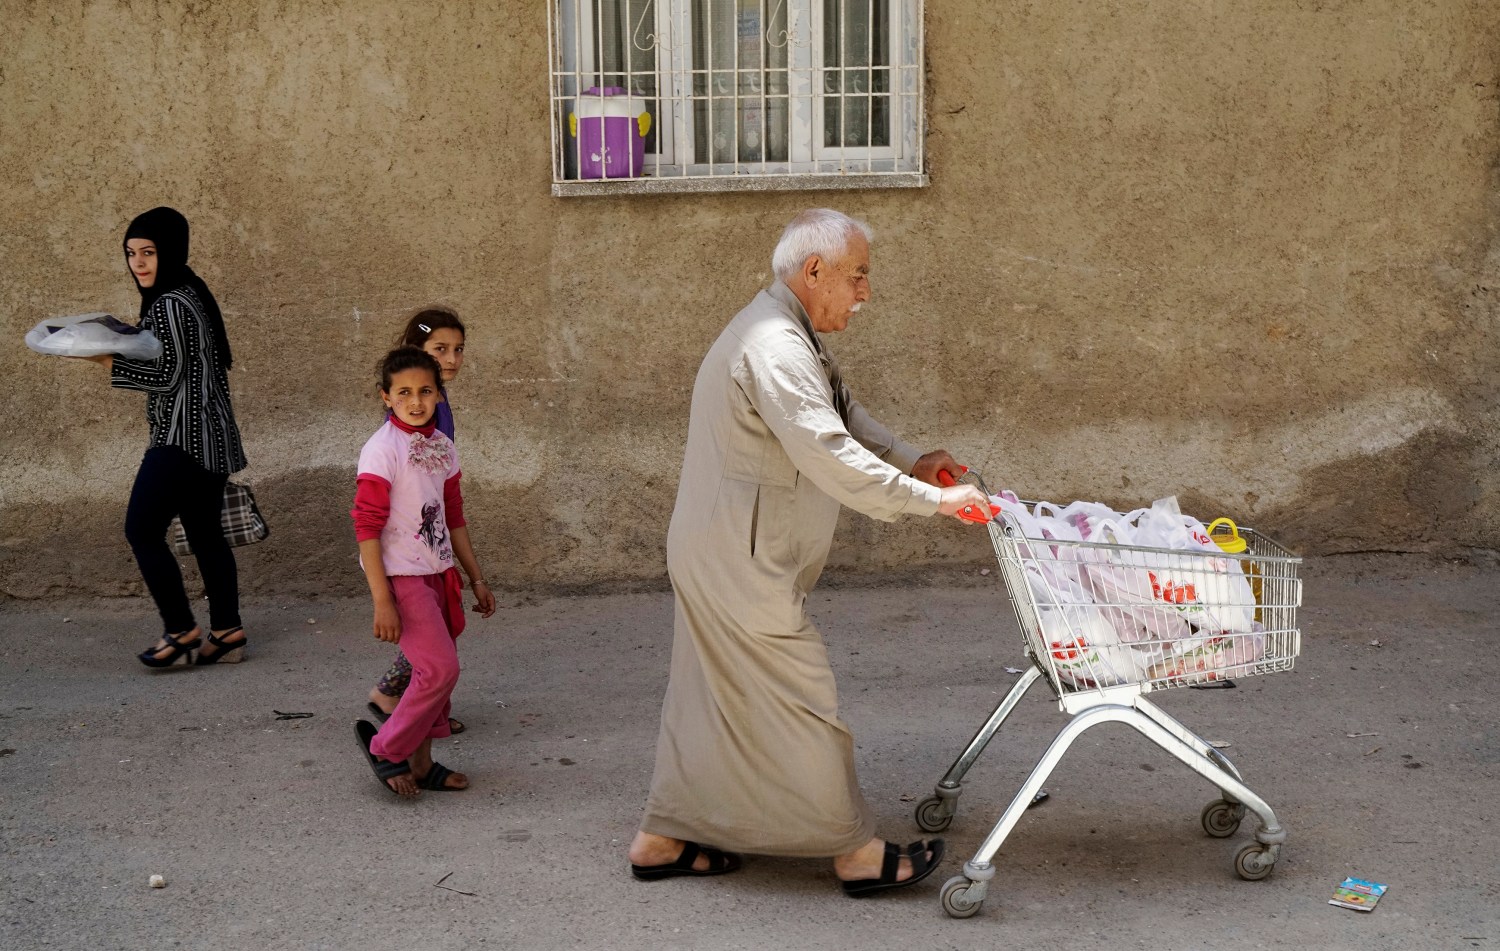 Ahmed, a 60-year old Syrian refugee man, pushes a shopping cart as he walks his home in Gaziantep, Turkey, May 16, 2016. REUTERS/Umit Bektas                           - S1BETFDNKJAB